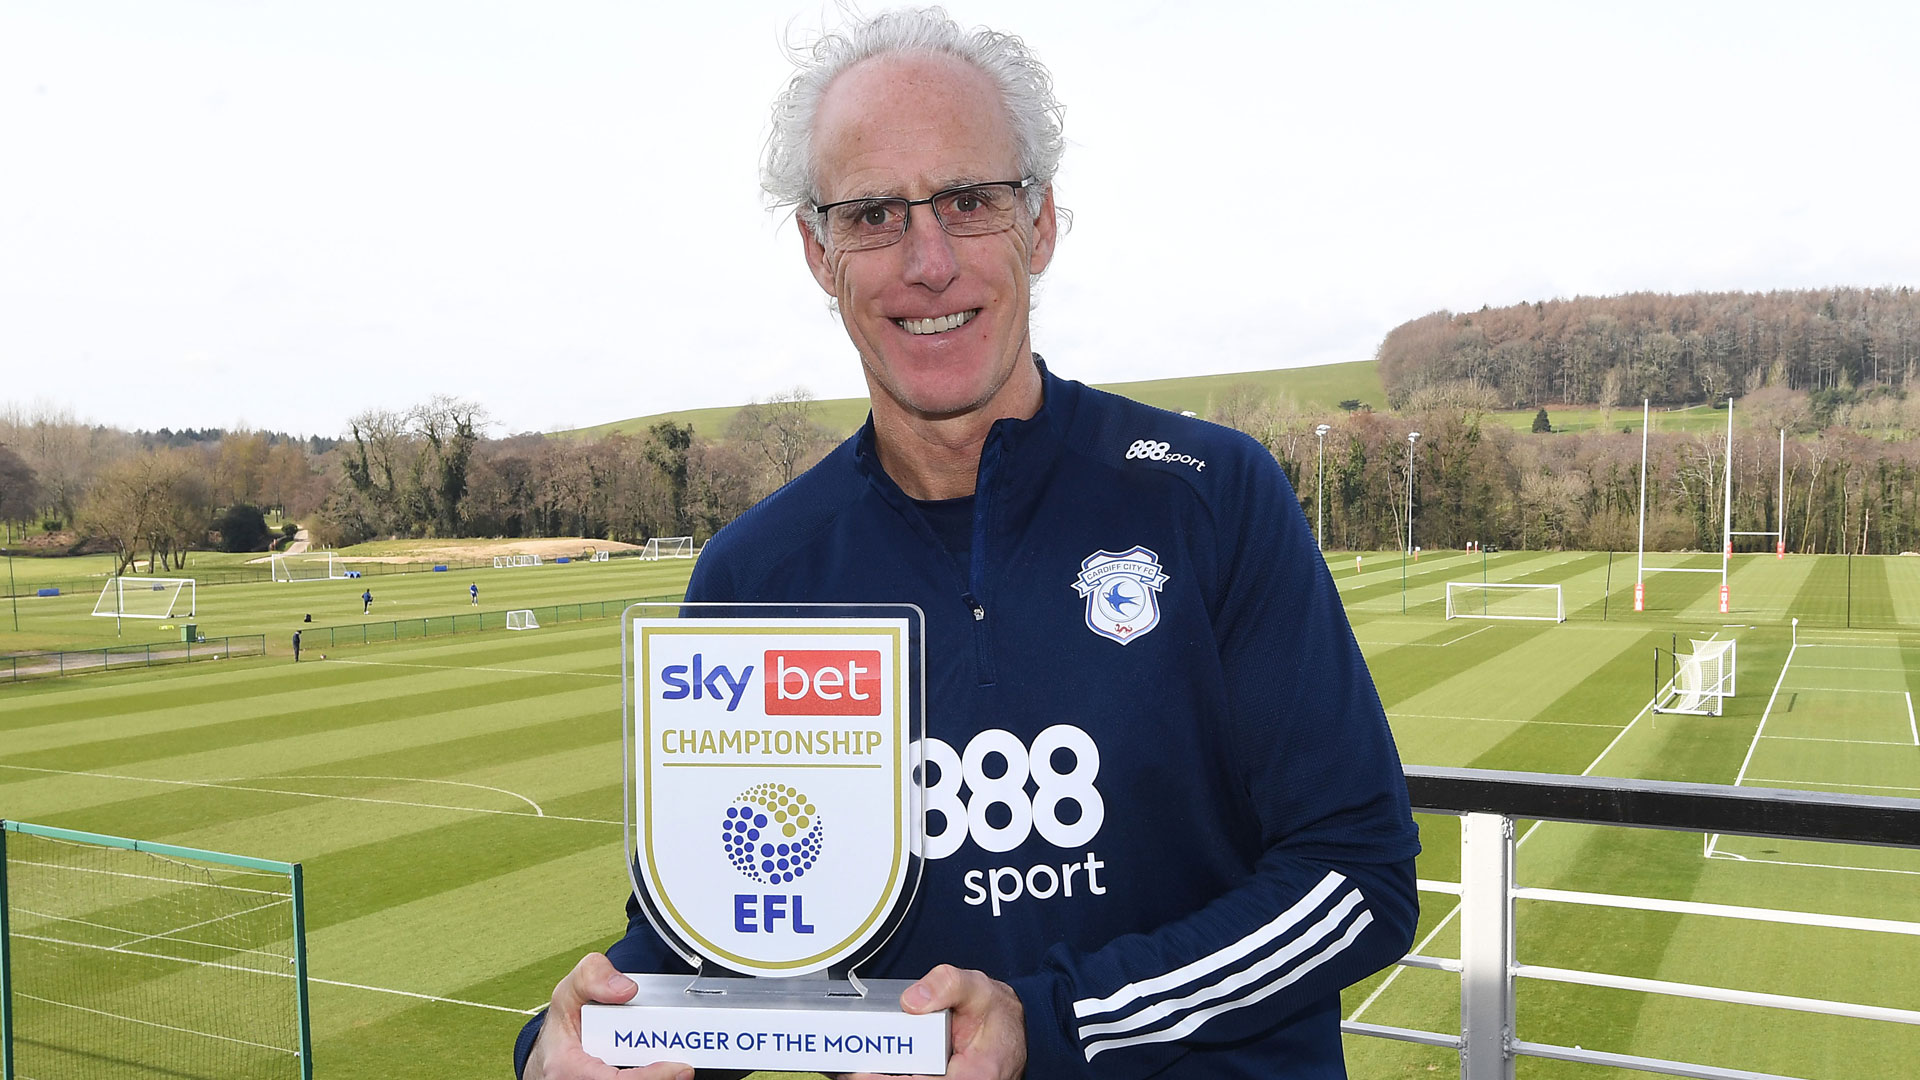 Mick McCarthy wins the Manager of the Month trophy for February...